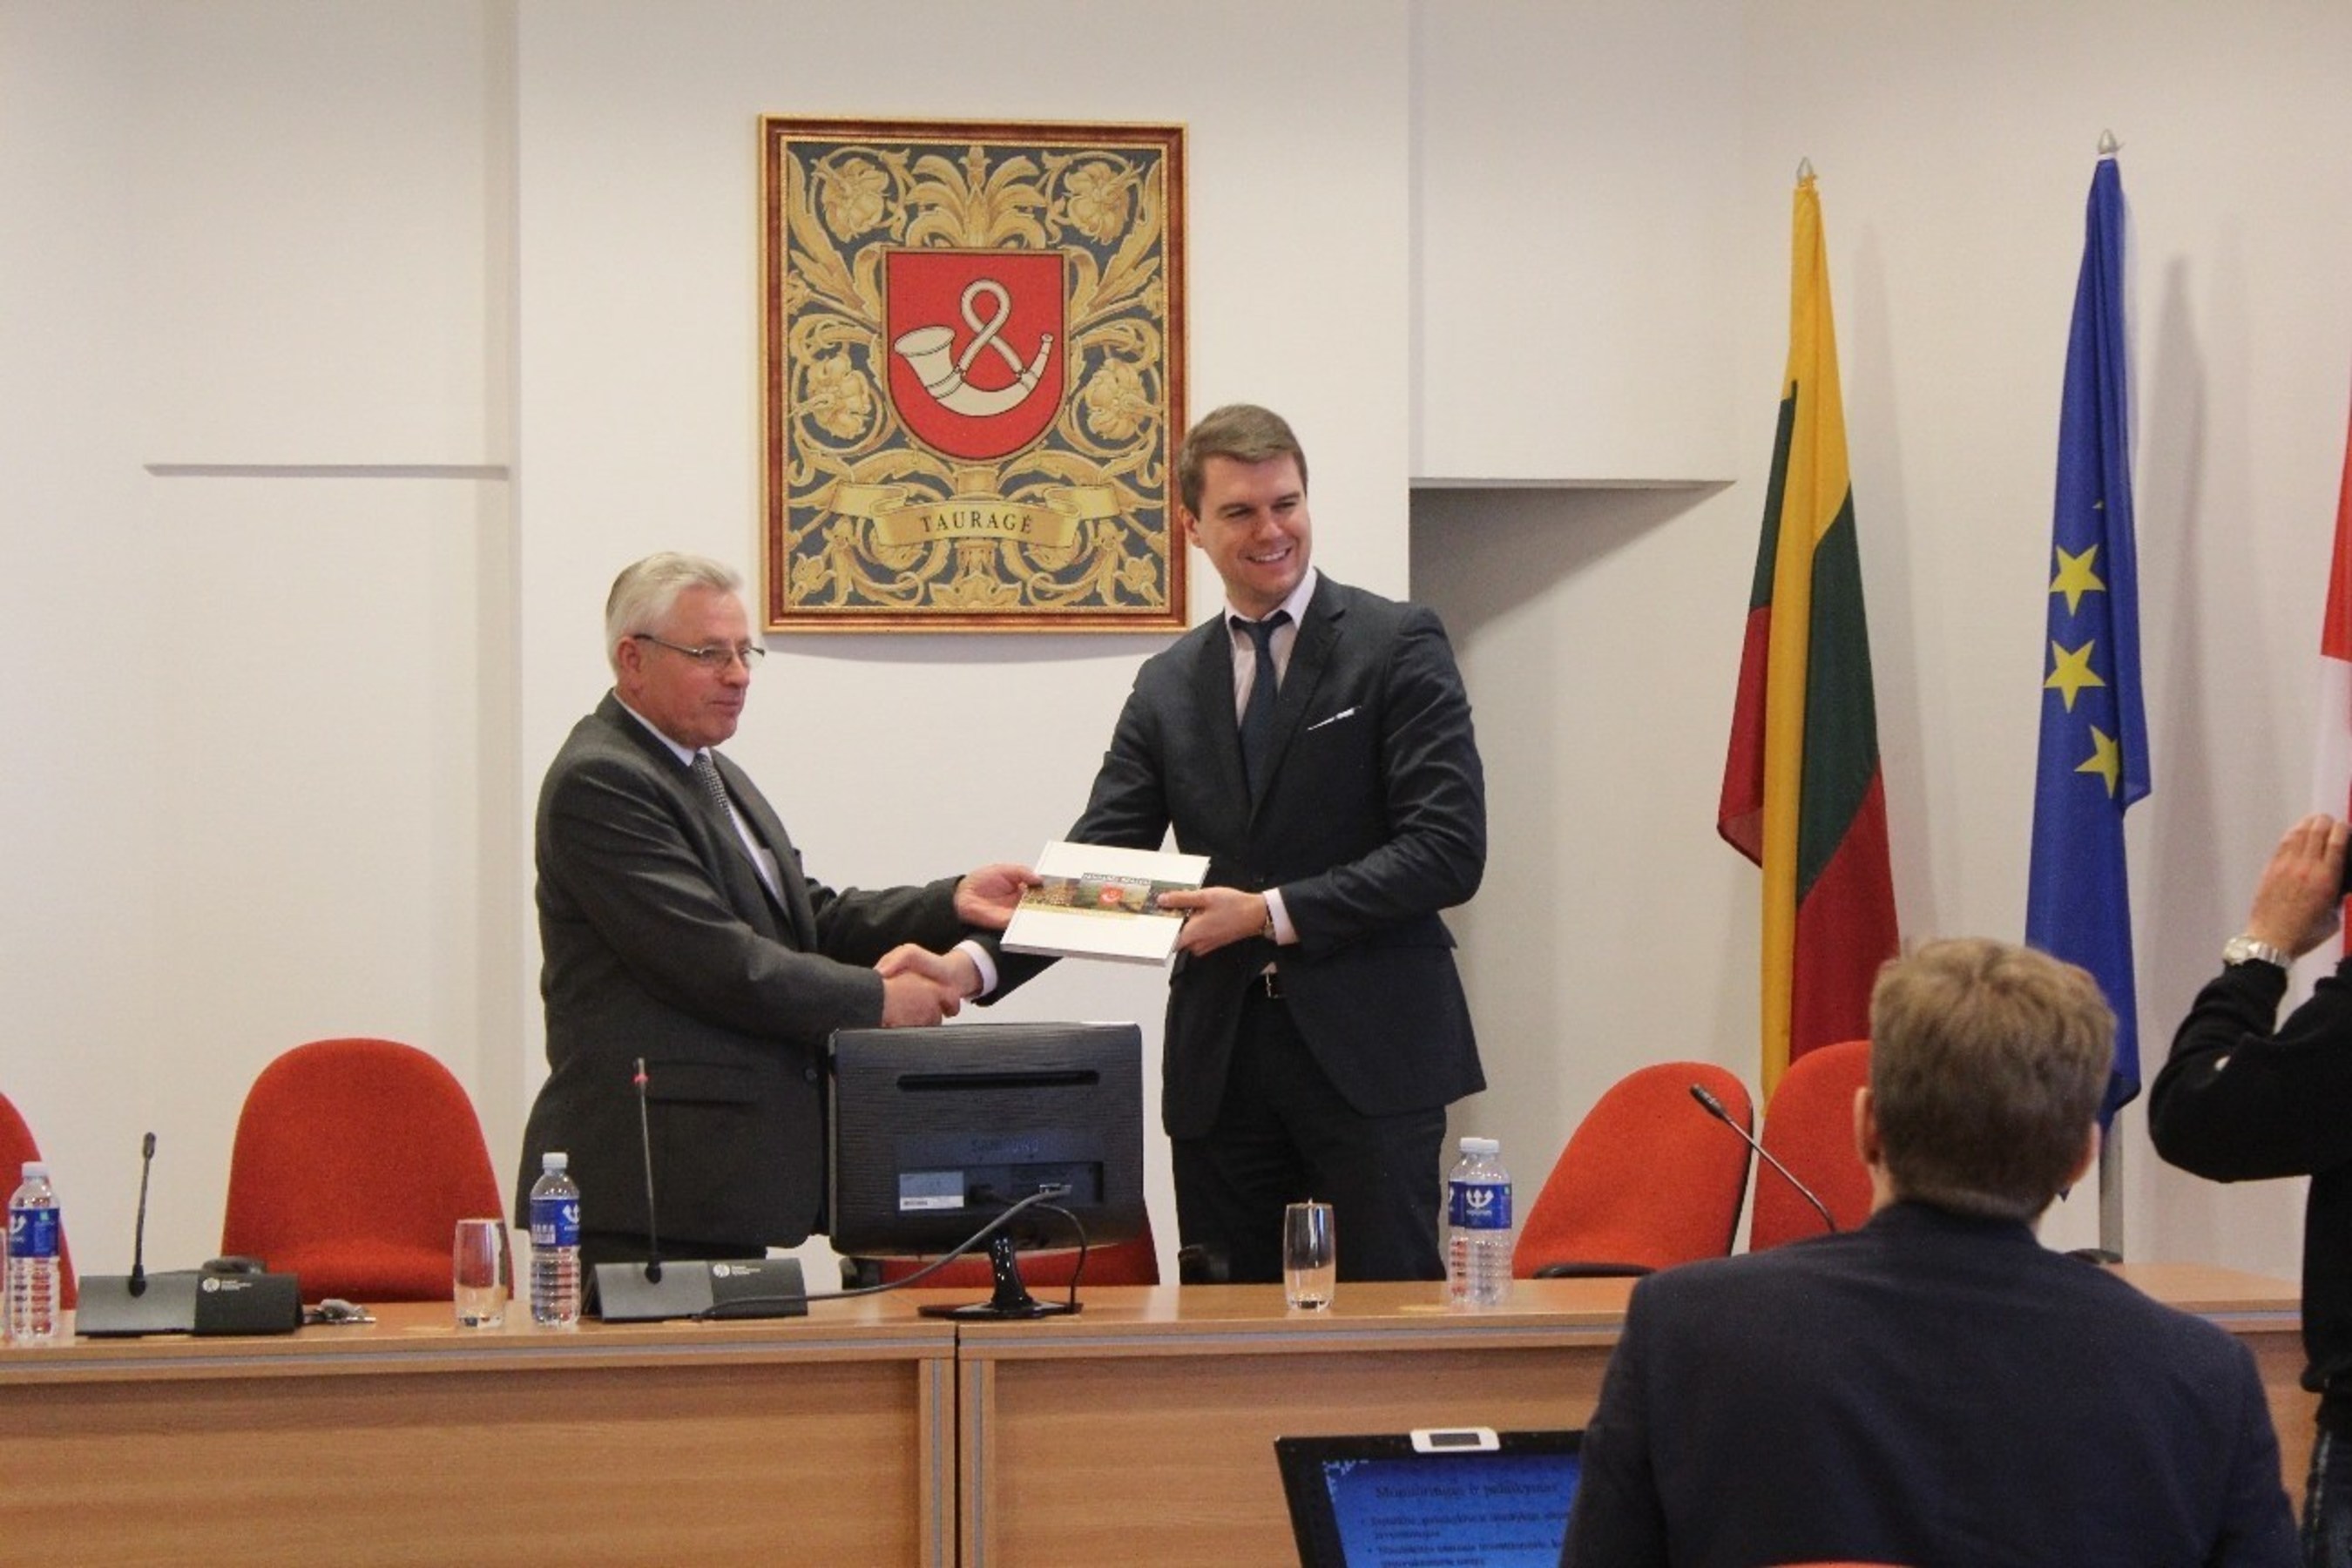 Lithuanian Free Market Institute President Zilvinas Silenas meeting the mayor of Taurage municipality in Lithuania.